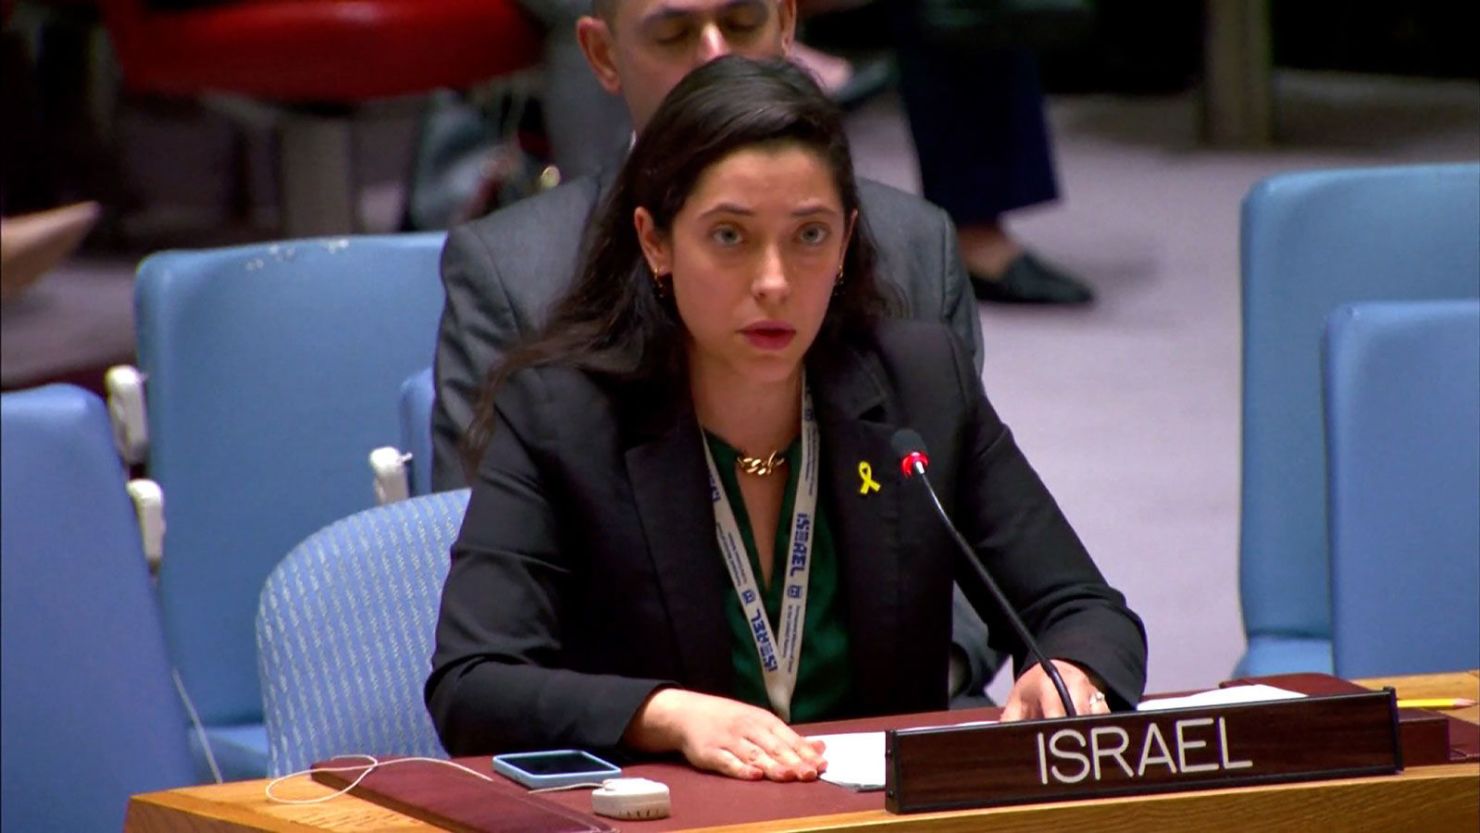 Israel's representative to the UN, Reut Shapir Ben-Naftaly, speaks at a United Nations Security Council meeting focused on ending the conflict on Monday, June 10.